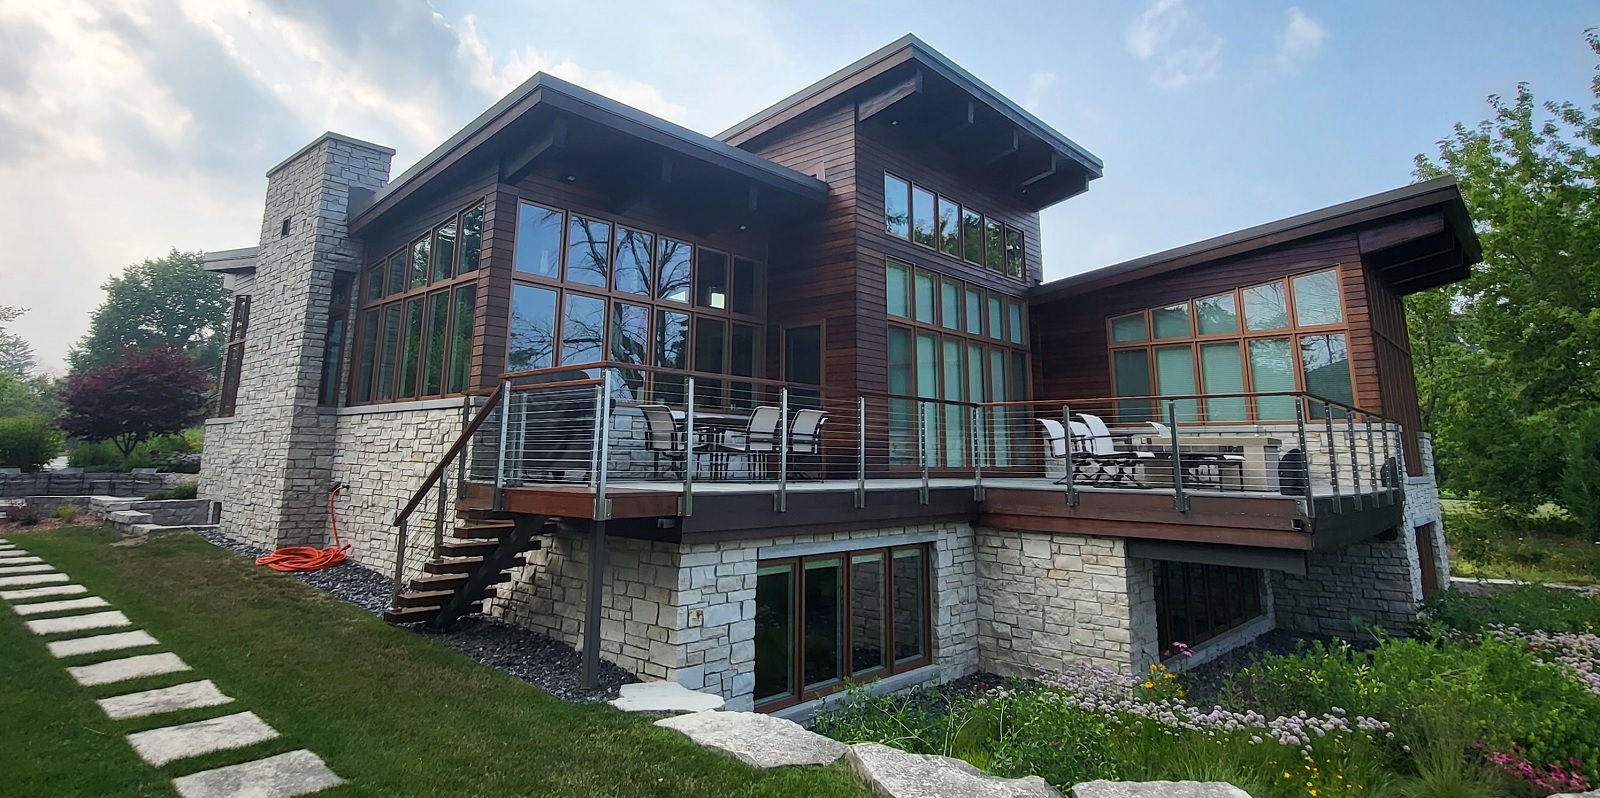 Exterior image of the butterfly house, a custom home built by Mikkelson Builders.  Modern prairie design featuring slanted roofs and multiple windows.